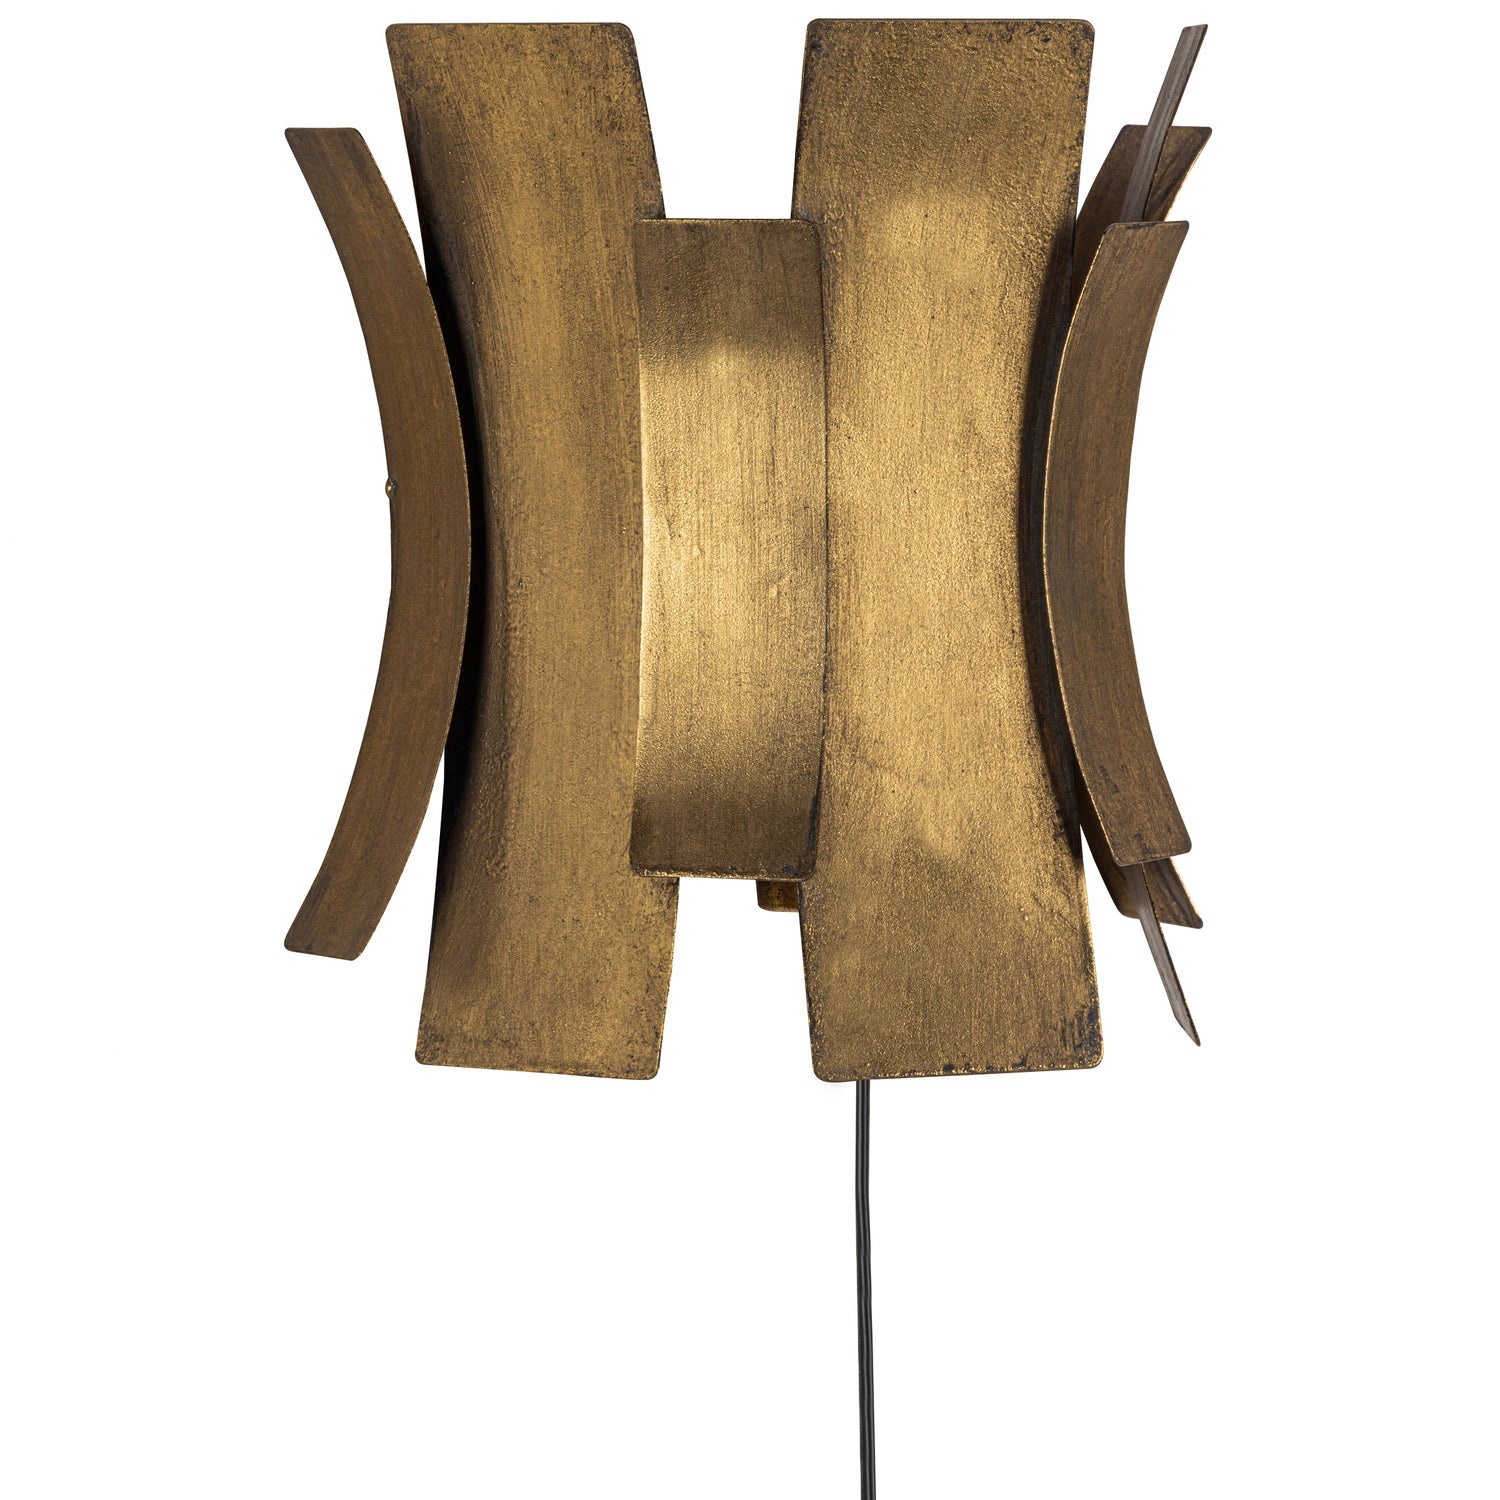 COURSE WALL LAMP METAL ANTIQUE BRASS